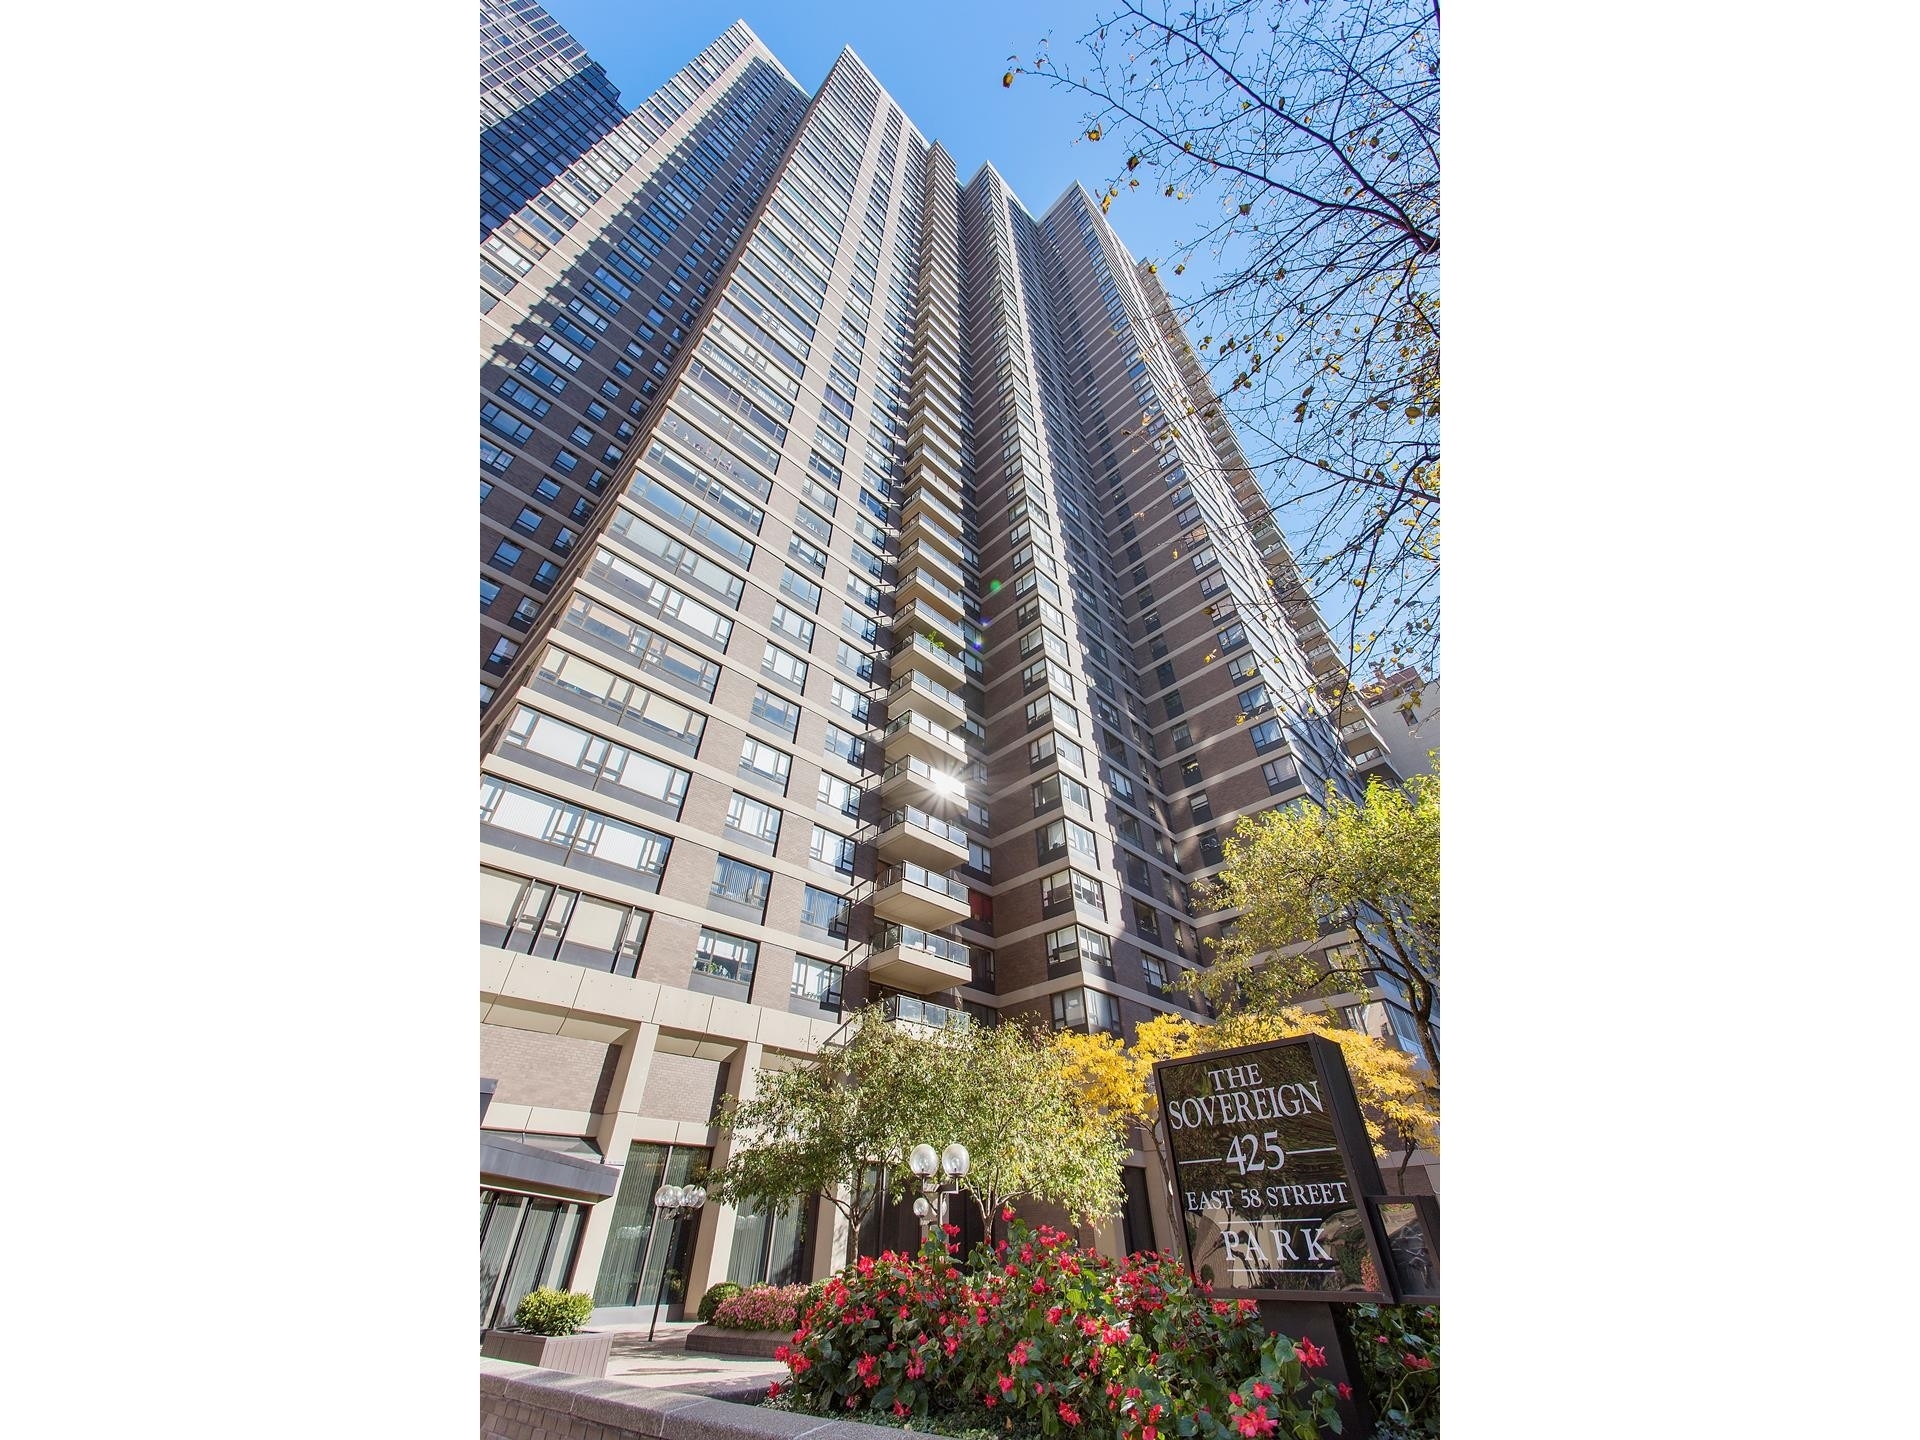 9. Co-op Properties for Sale at The Sovereign, 425 E 58TH ST, 16A Sutton Place, New York, NY 10022